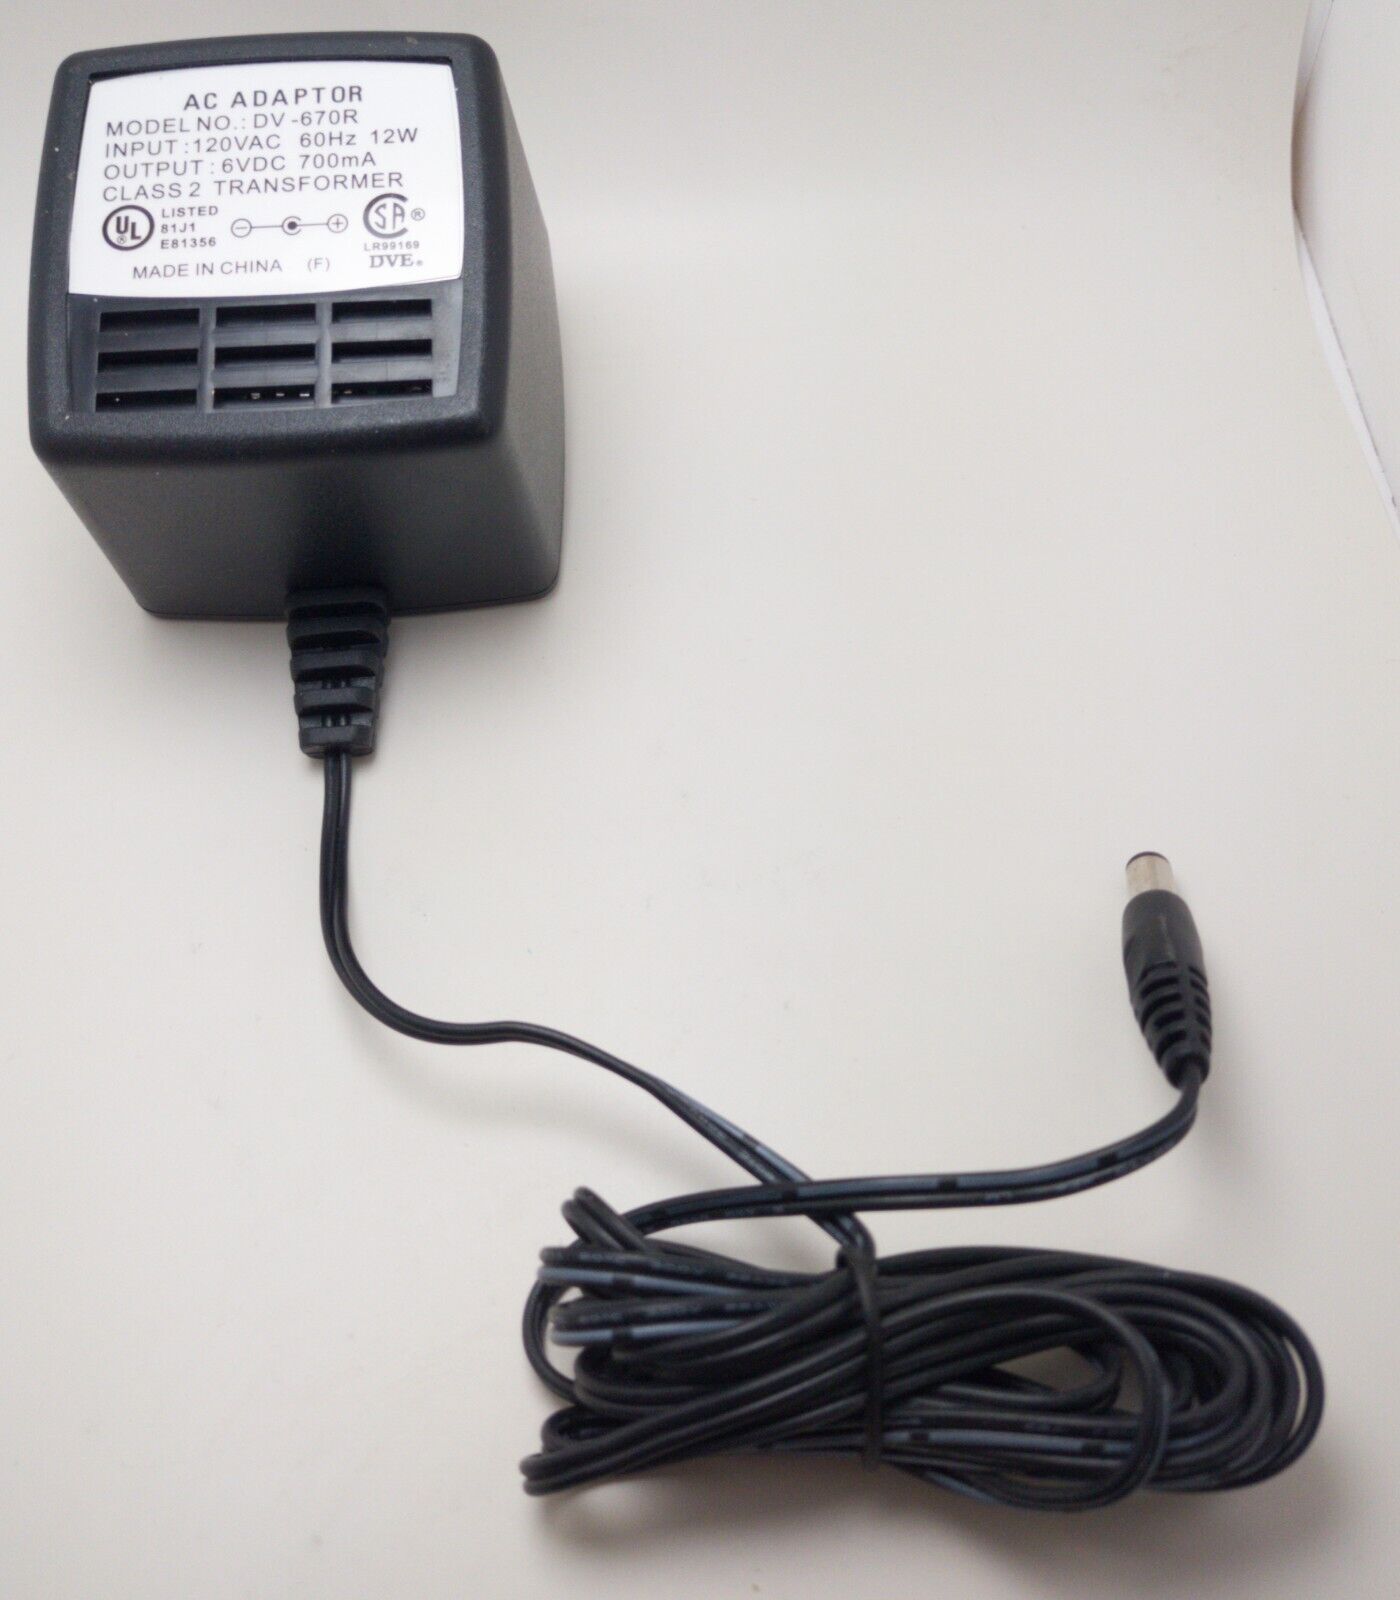 *Brand NEW*In 120V Out 6VDC 700mA AC-DC Adapter DVE Model No: DV-670R TESTED Working Power Supply